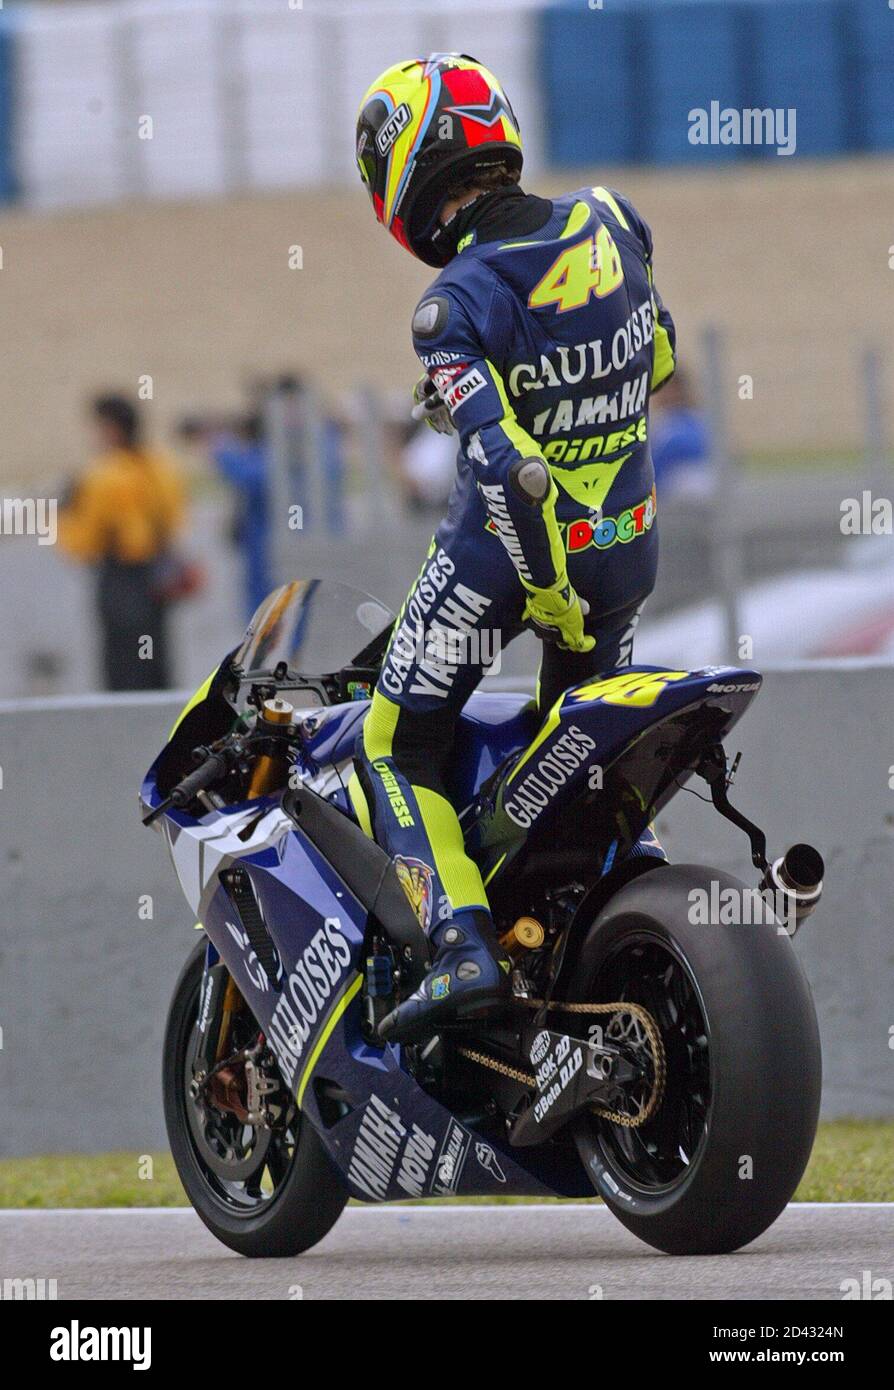 Italian rider Rossi adjusts his pants over his Yamaha motocycle during  practice session for Spain Grand Prix in Jerez. Italian rider Valentino  Rossi adjusts his pants over his Yamaha motorcycle during the